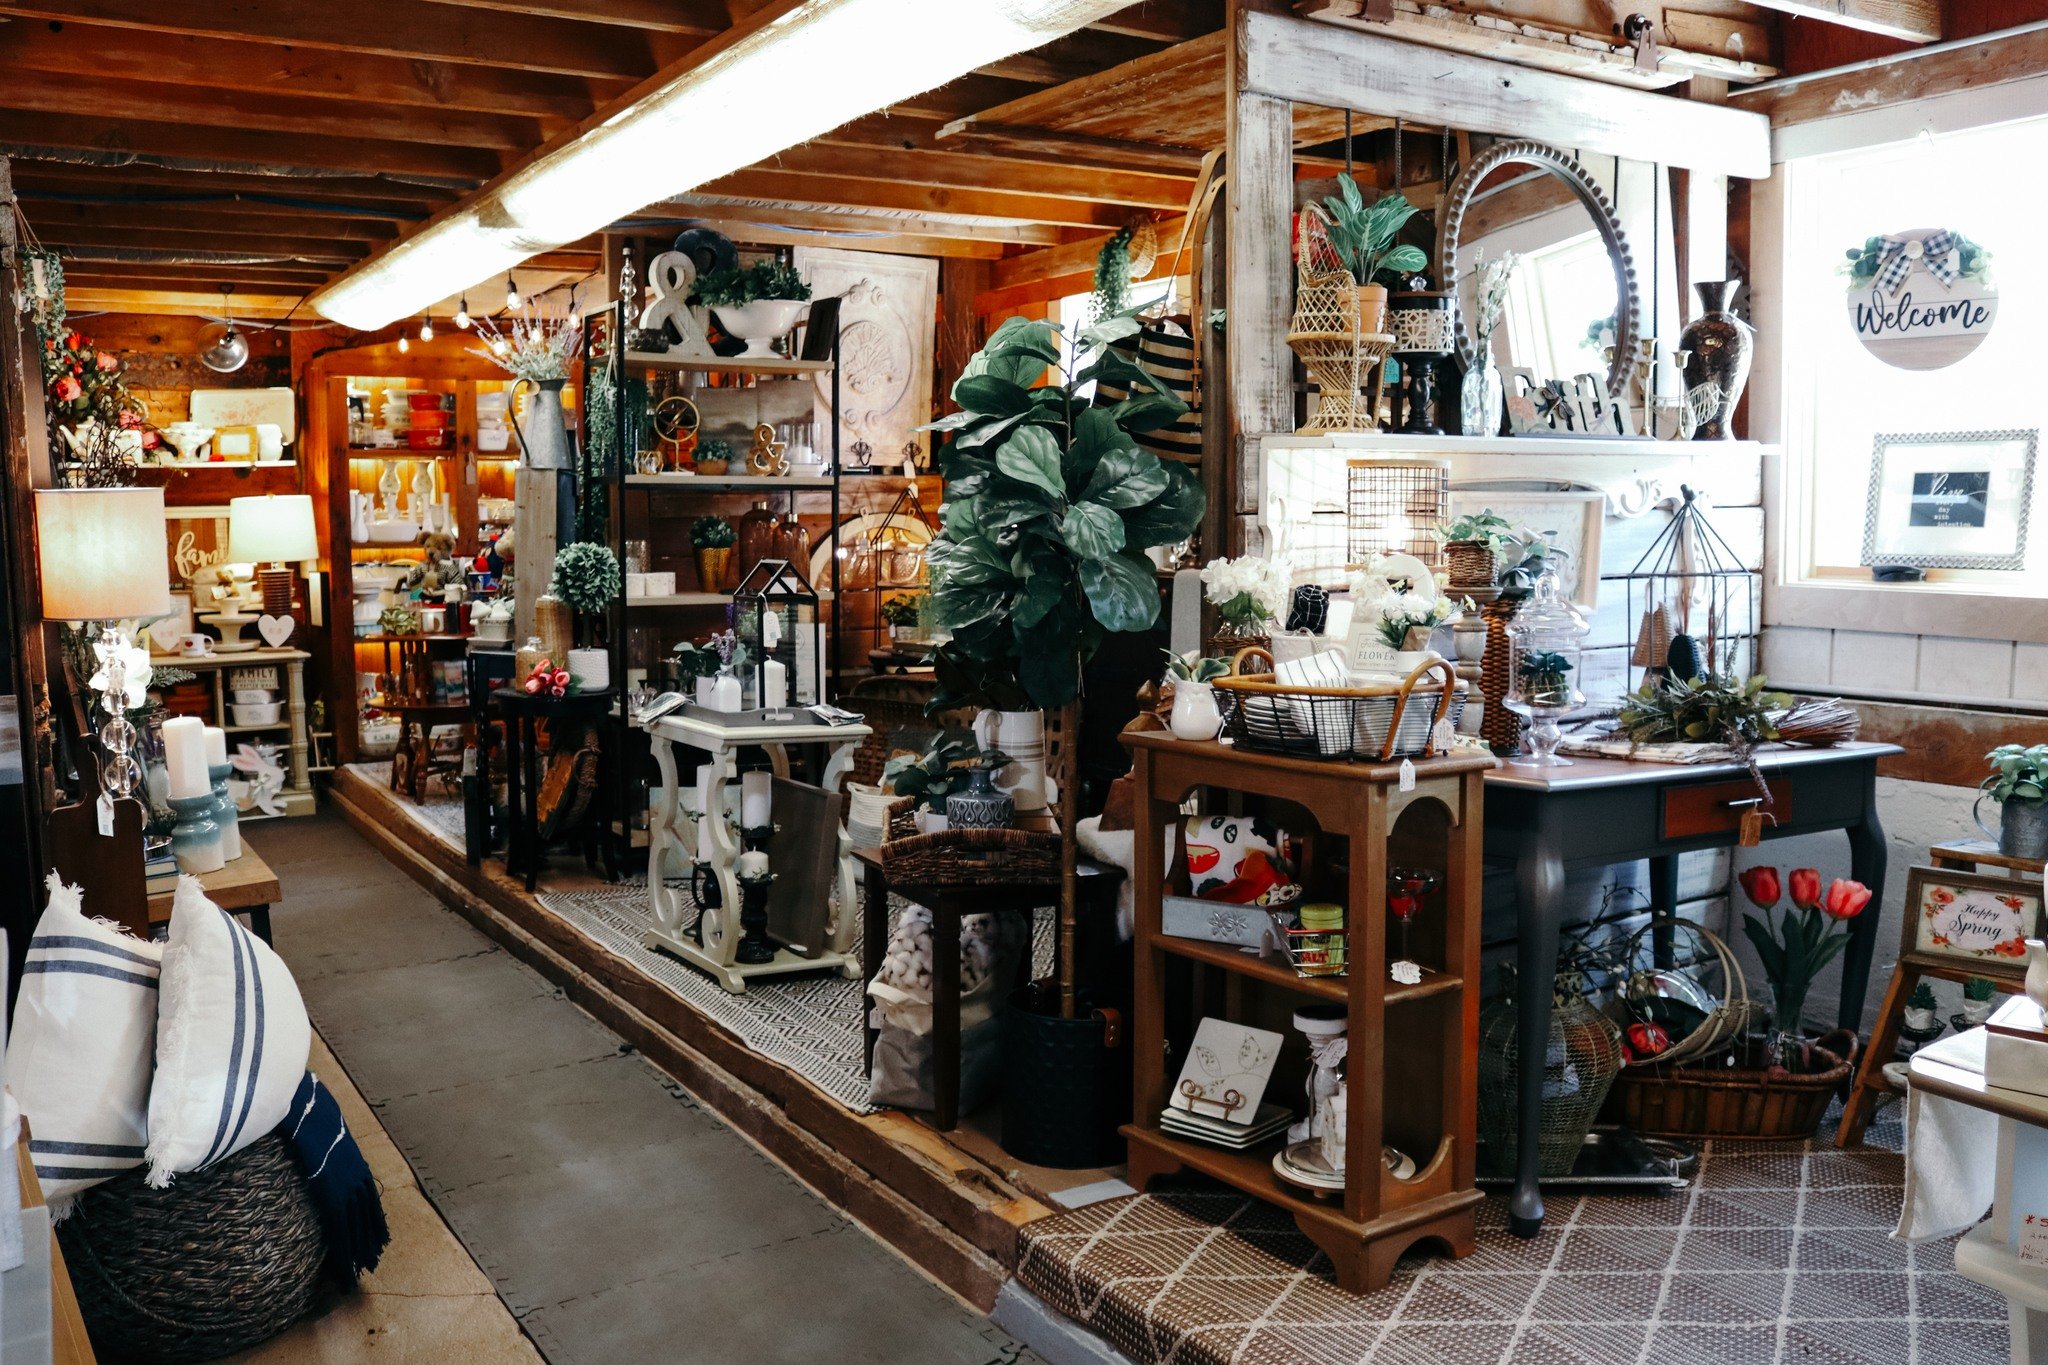 BROWSE OUR FURNITURE SELECTION!

Did you know that our rustic market is filled with antique, refinished, and custom furniture pieces, too? Shop with us today and discover a ton of unique finds for your home!

www.prestigecreativemarkets.com | 630-326